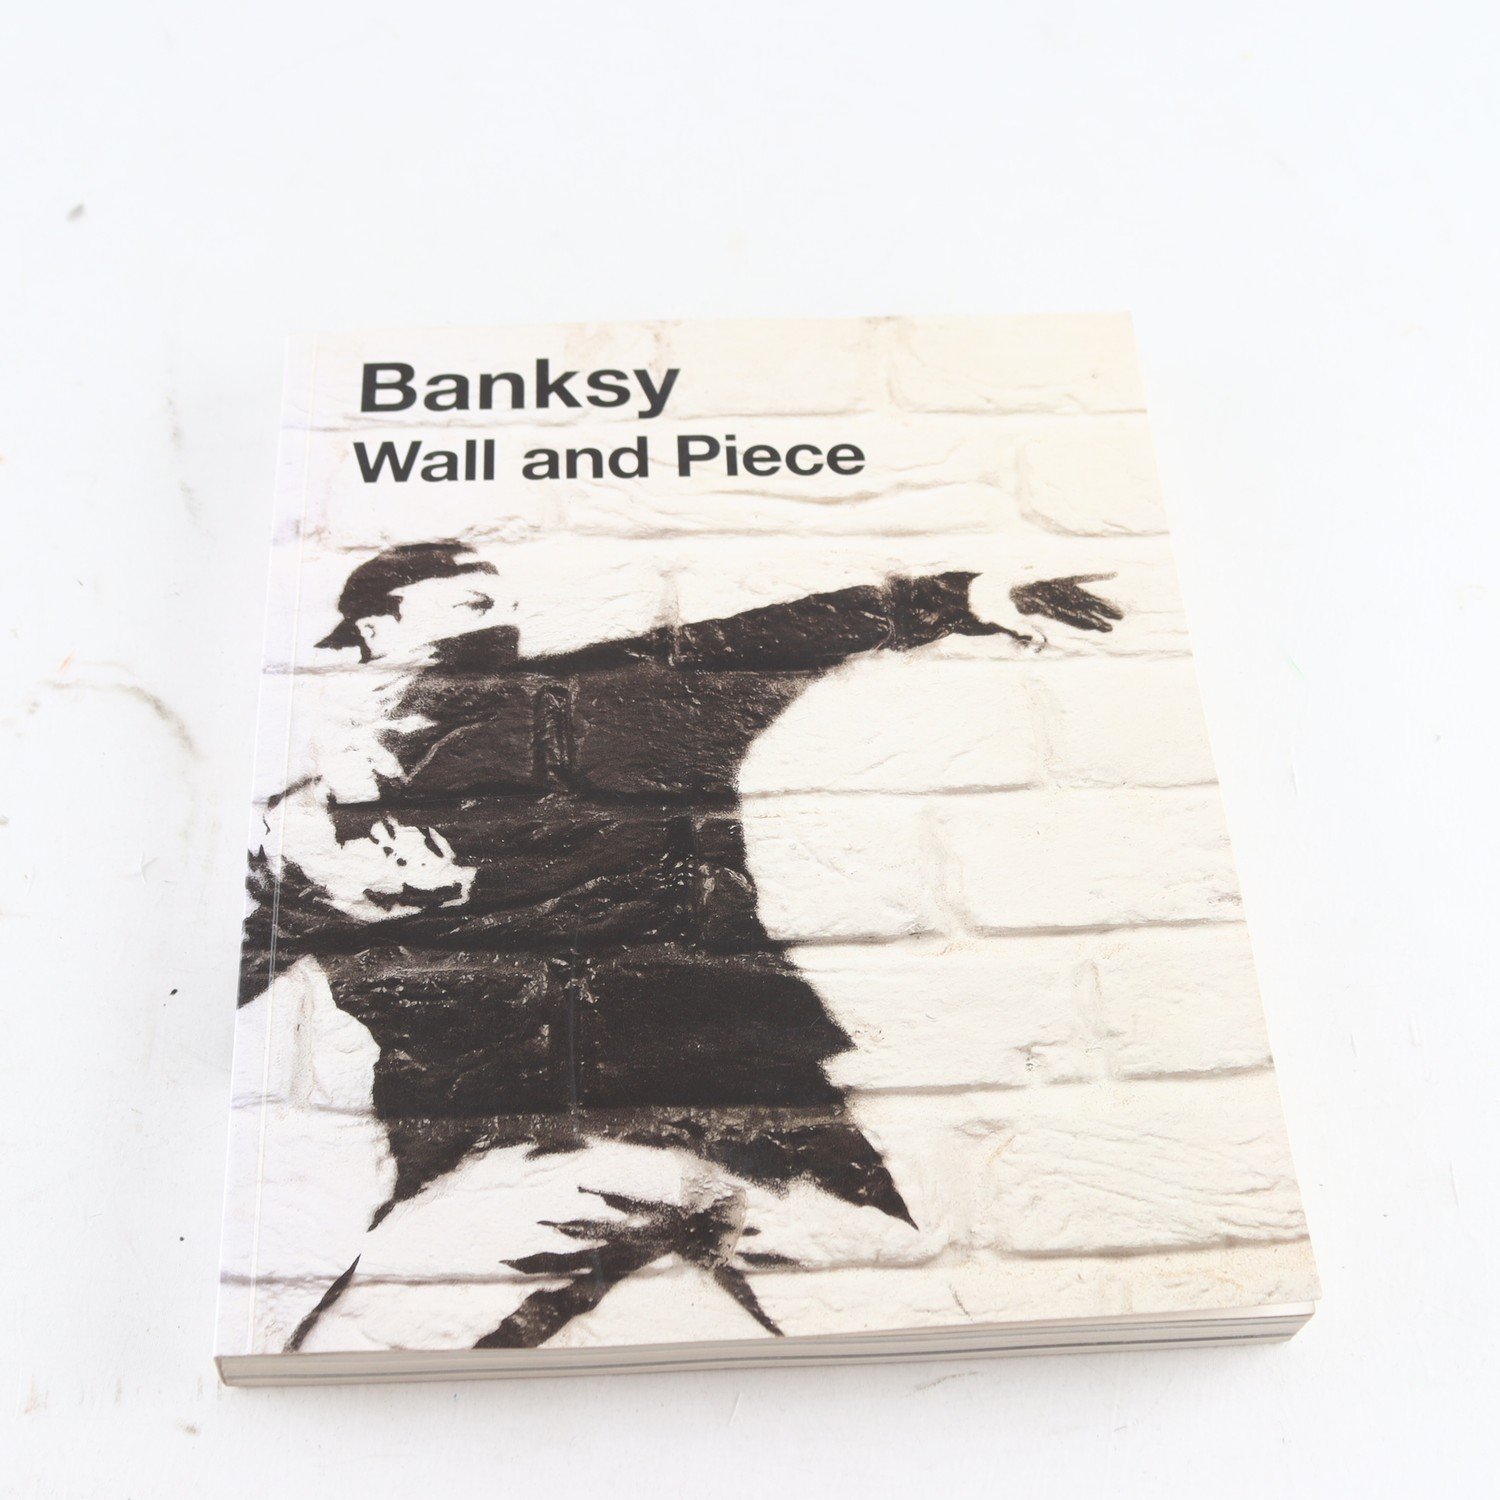 Banksy, Wall and Piece